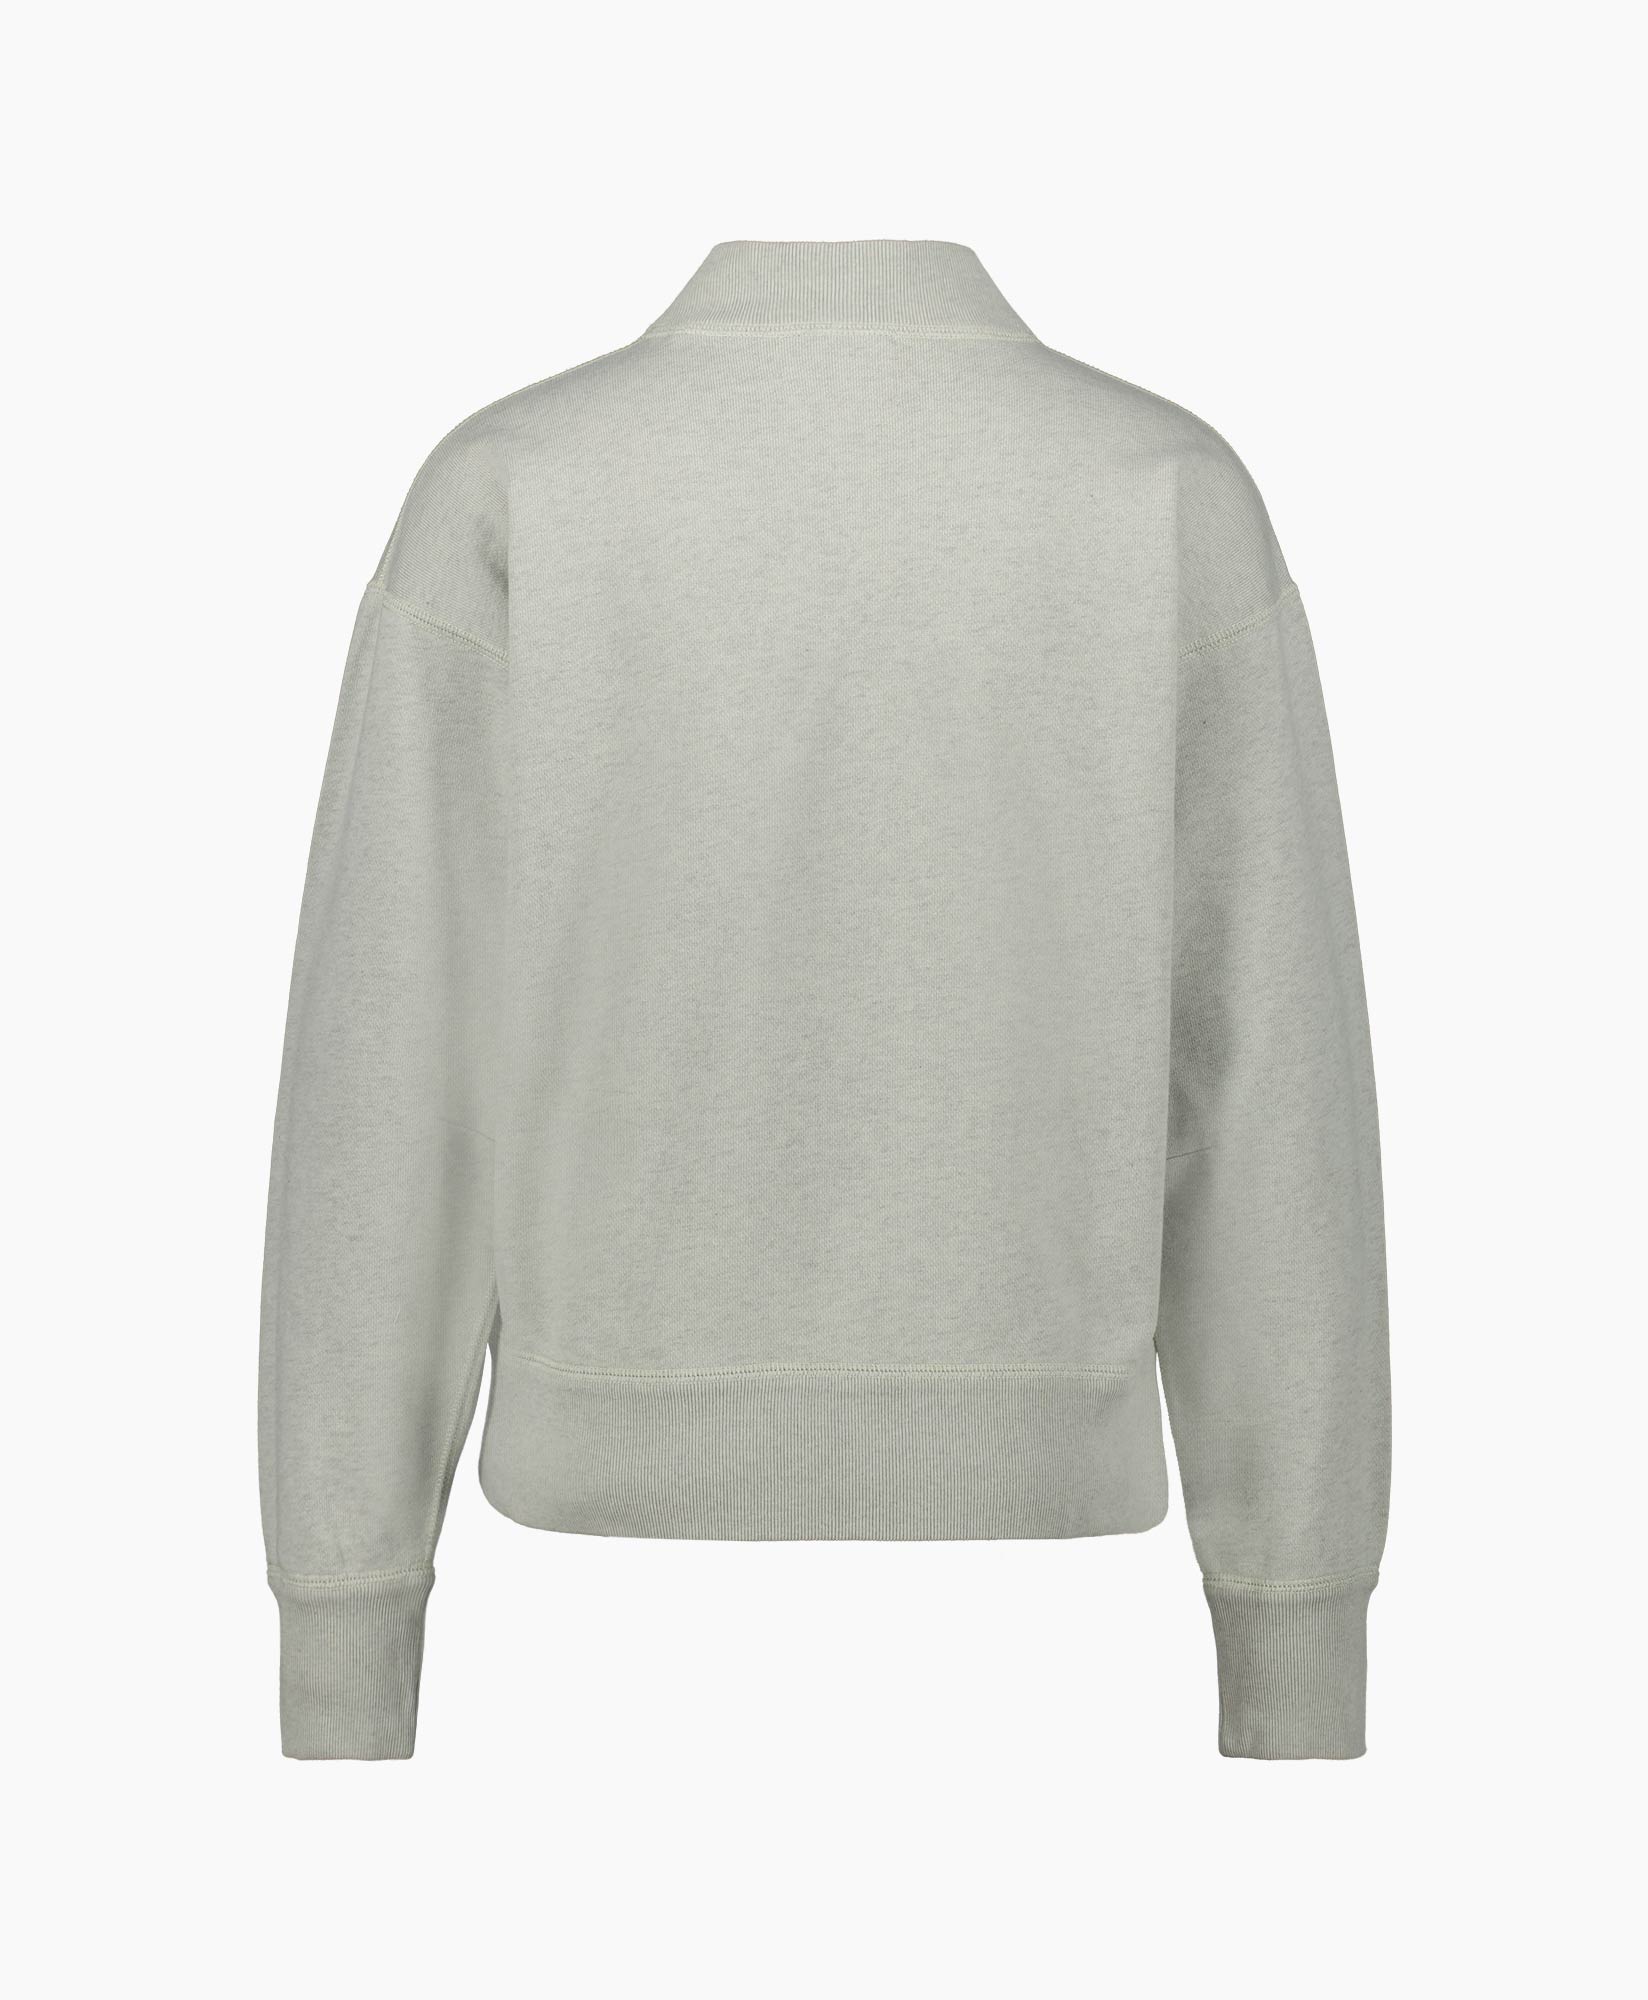 Marant Étoile Pullover Moby Blauw